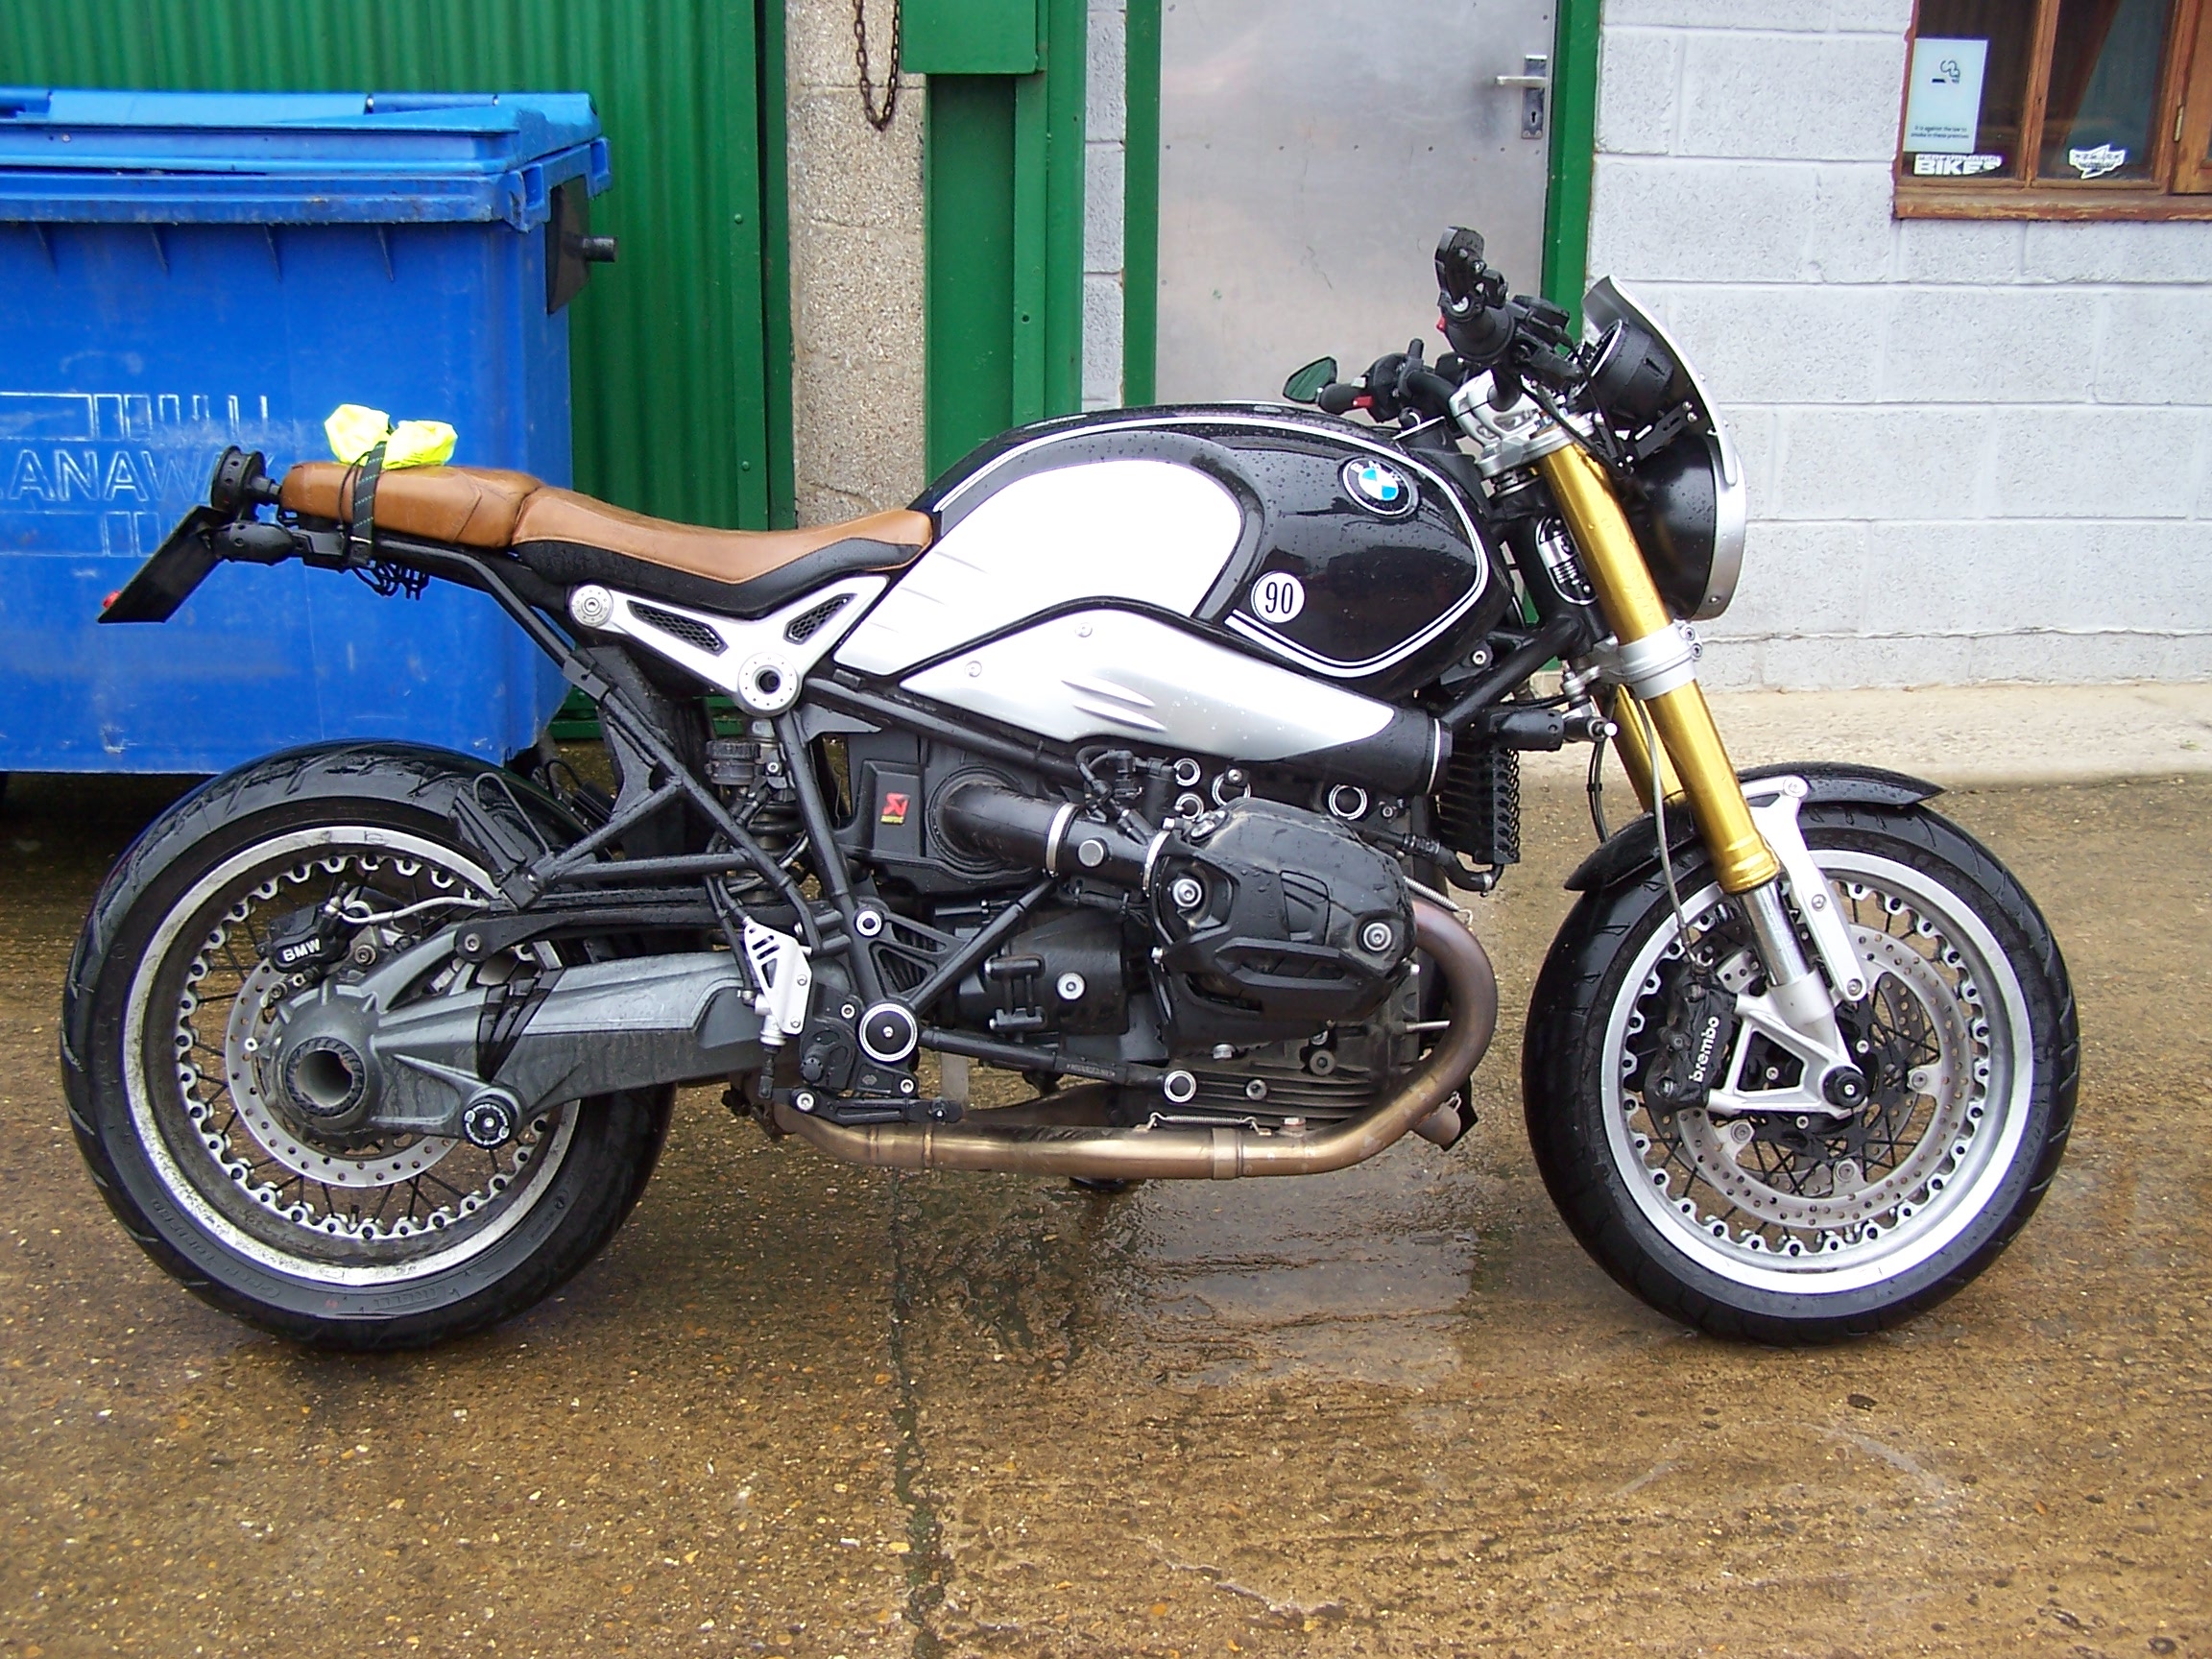 BMW R9T 2014 WITH FULL AKRAPOVIC EXHAUST